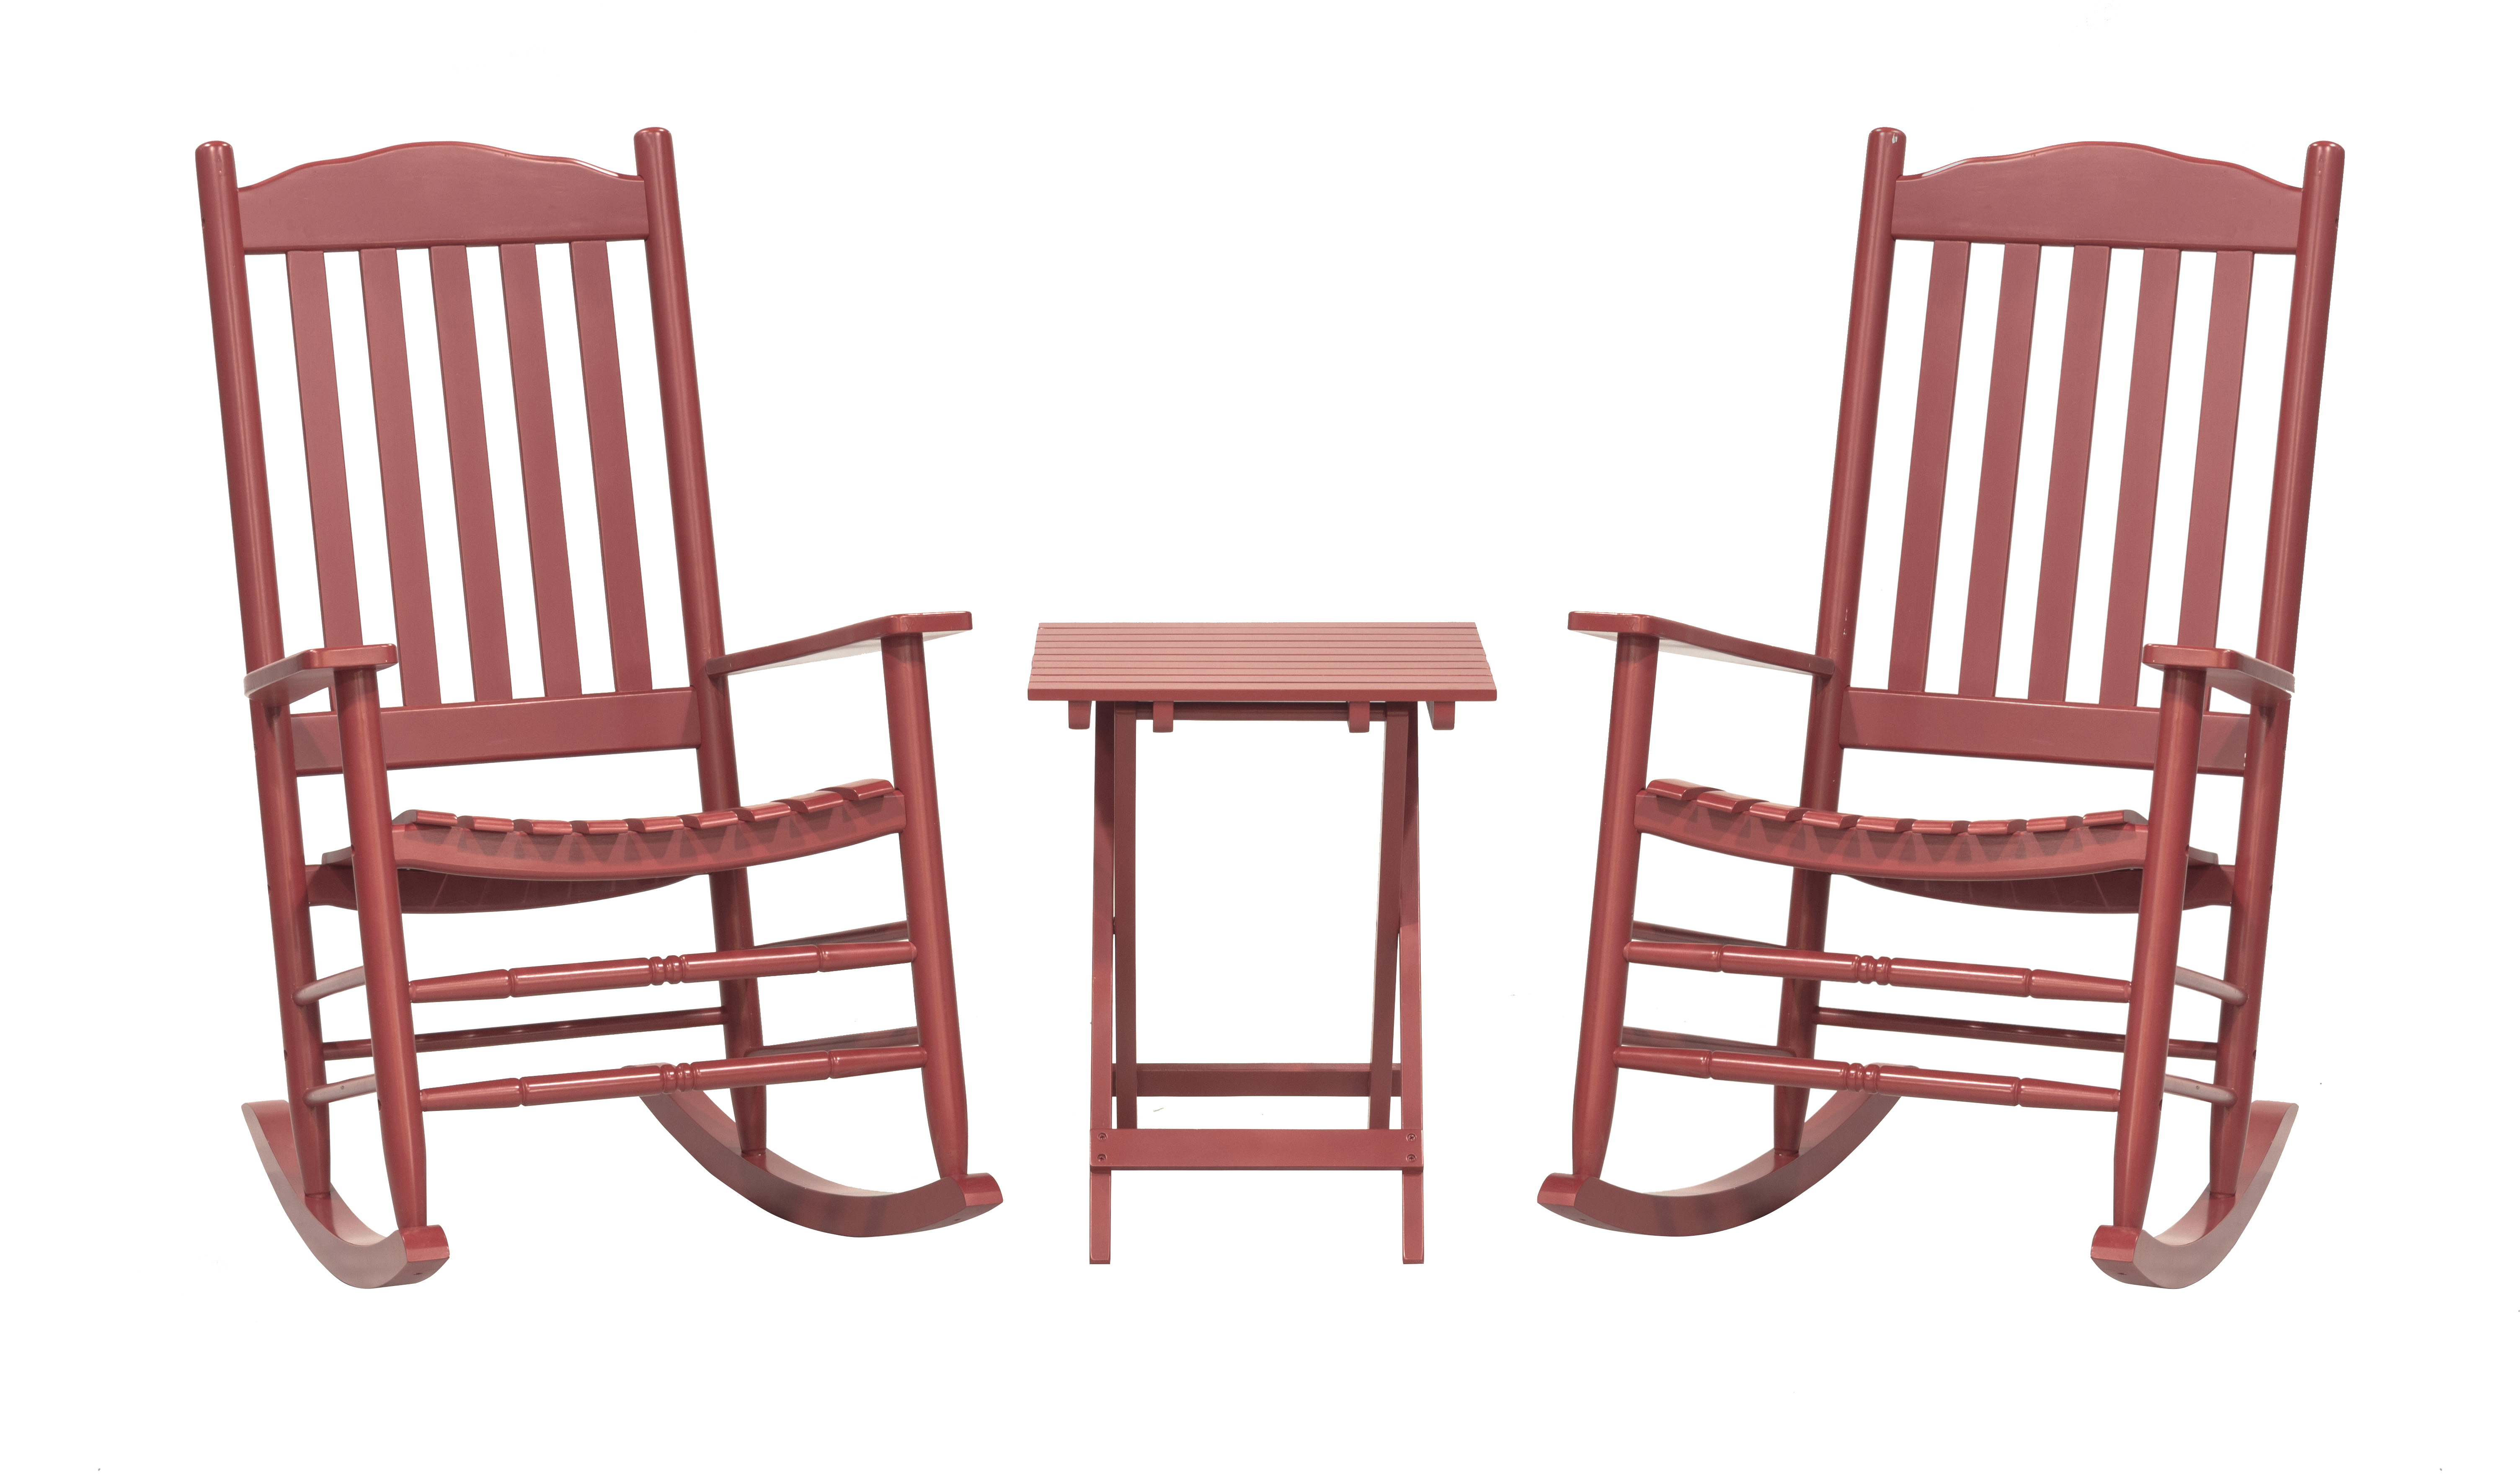 Outdoor Patio Garden Furniture 3-Piece Wood Porch Rocking Chair Set, Weather Resistant Finish,2 Rocking Chairs and 1 Side Table-Red - image 2 of 11